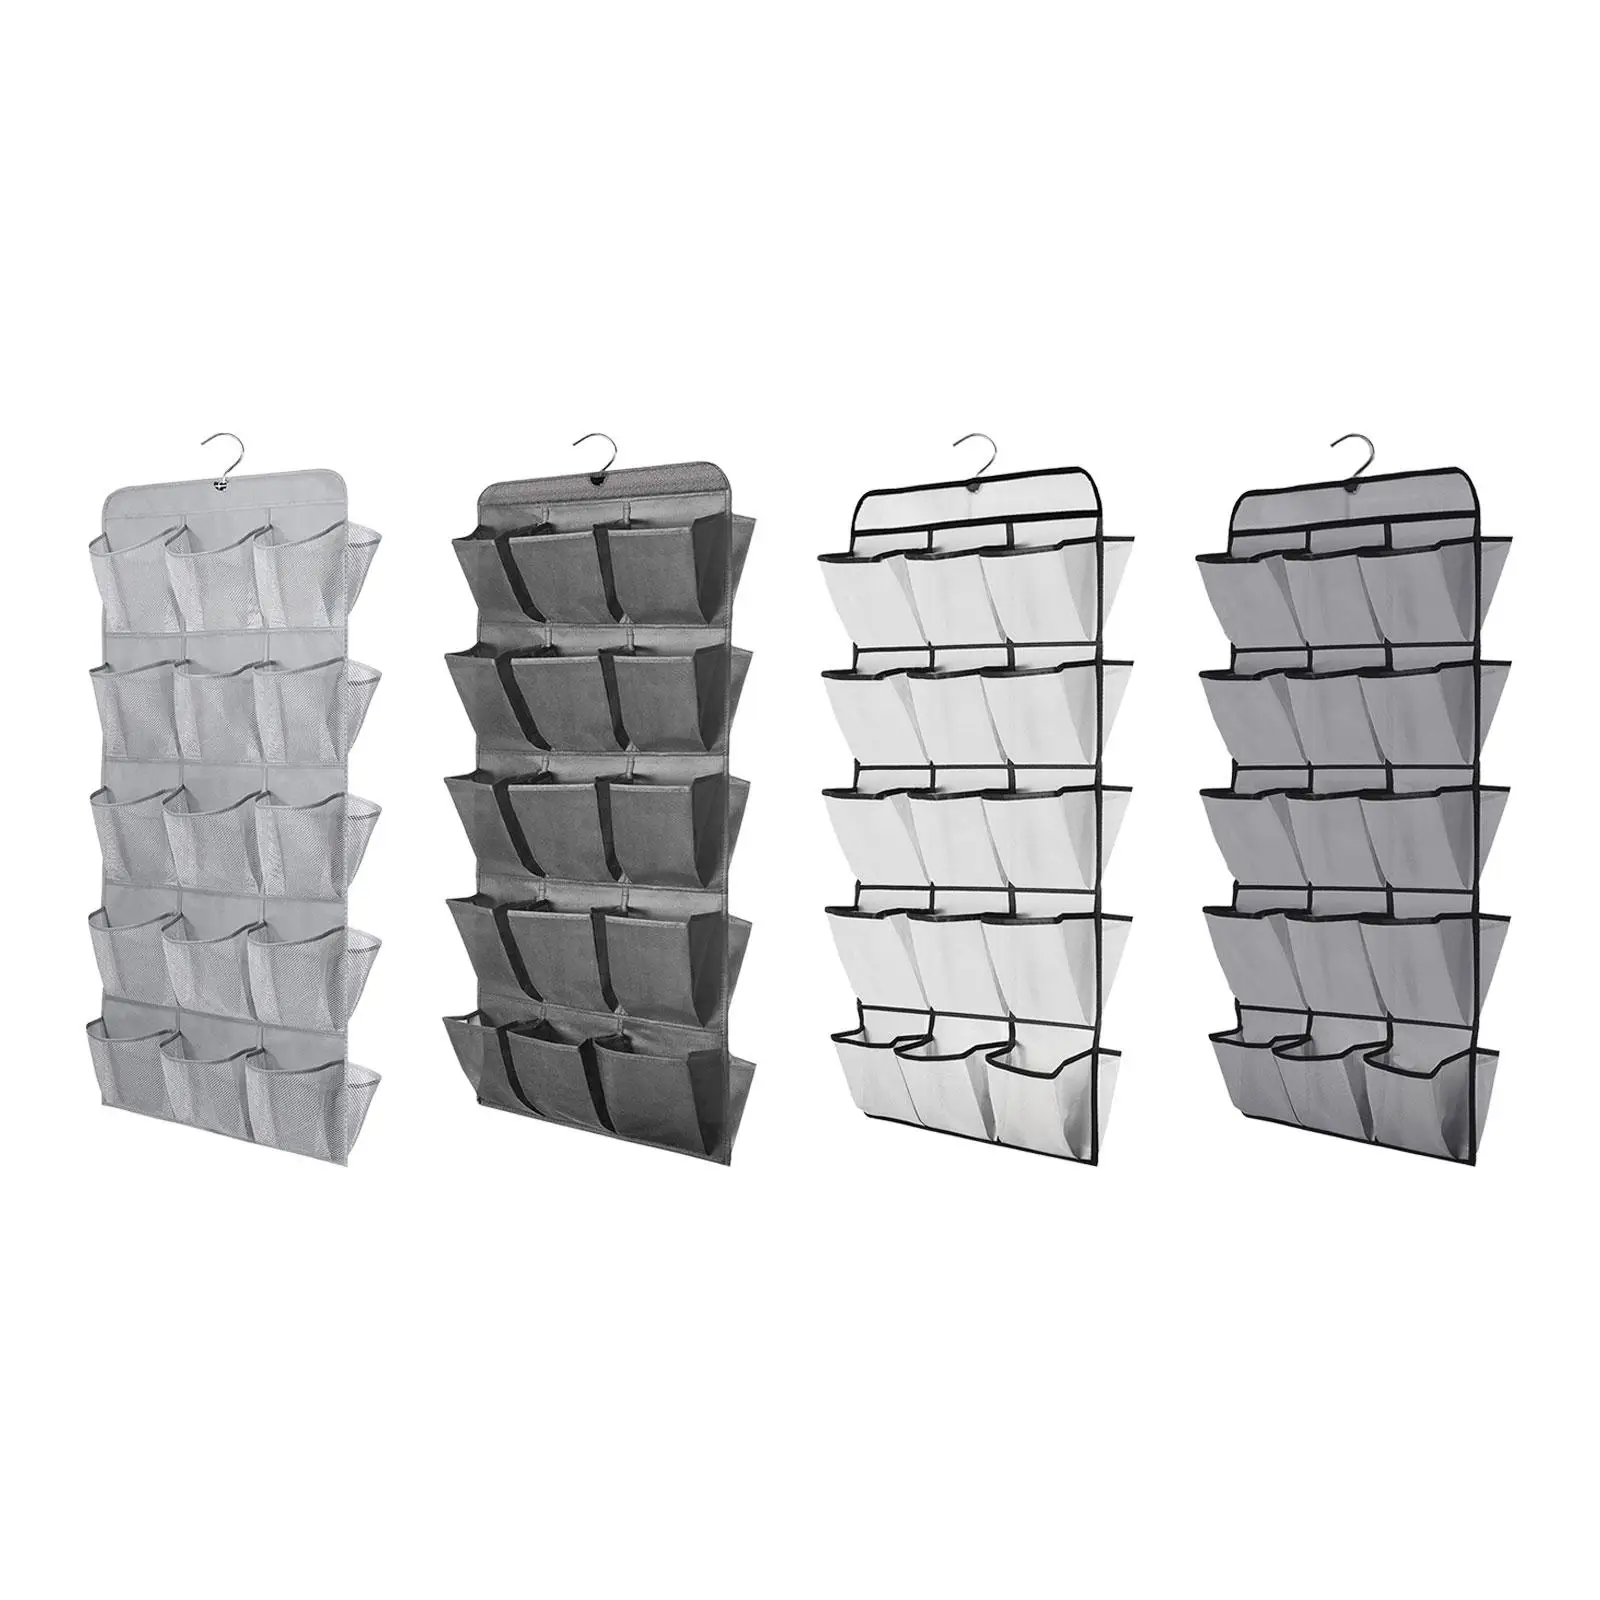 Shoe Storage Closet Shoes Storage Holder Foldable Space Saving Hanging Storage Bag for Ties Slippers Sneakers Shoes Bathroom